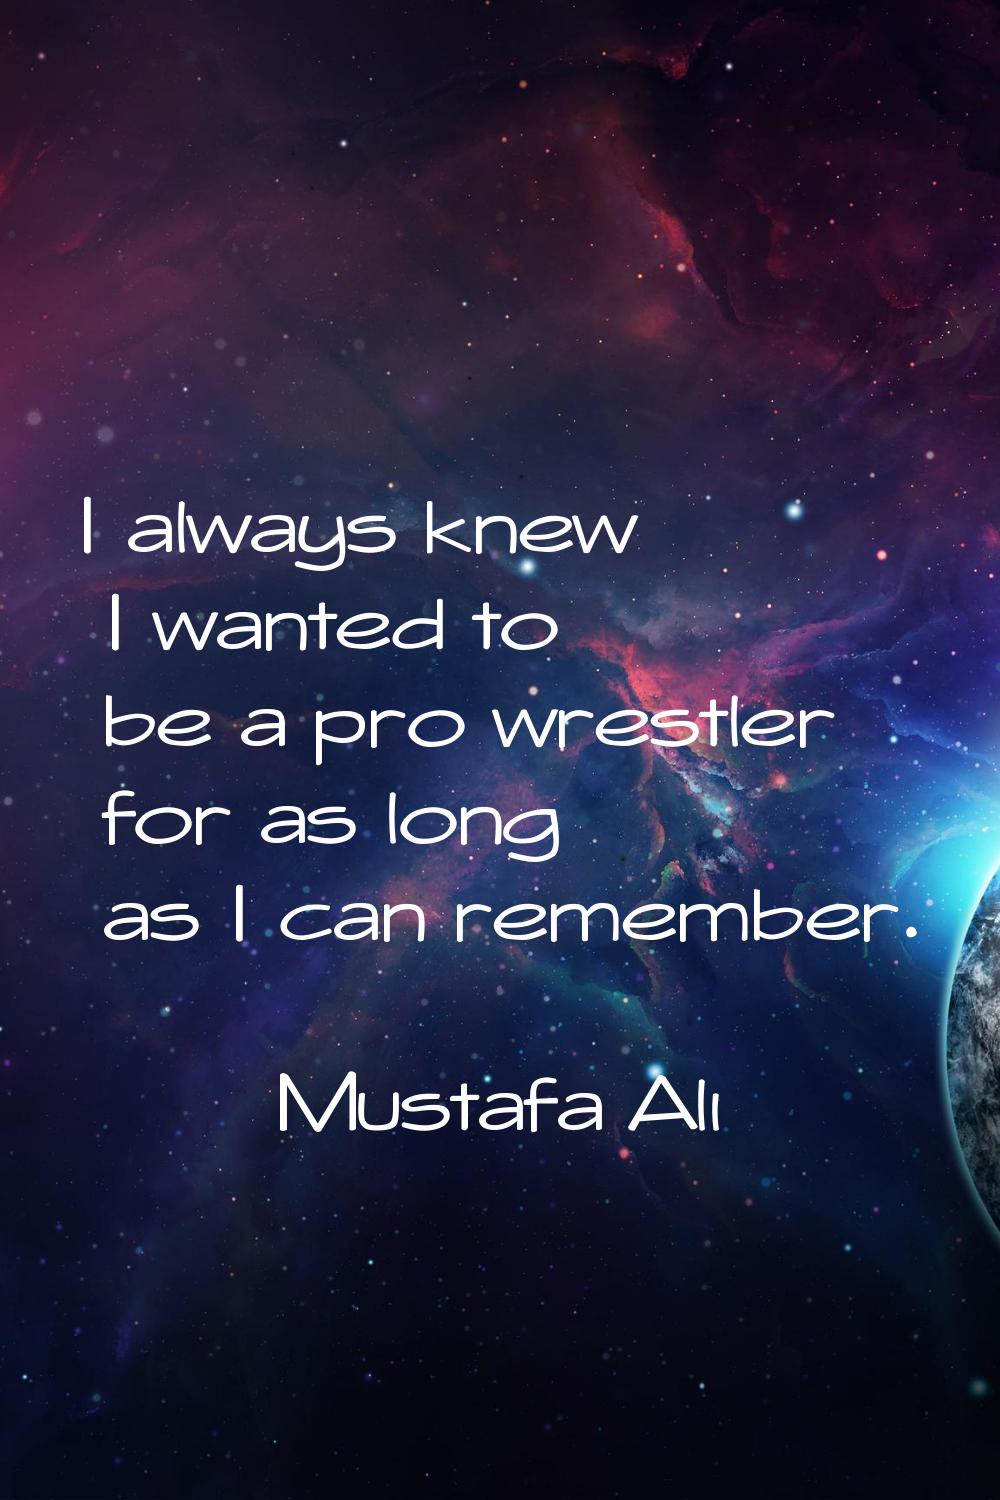 I always knew I wanted to be a pro wrestler for as long as I can remember.